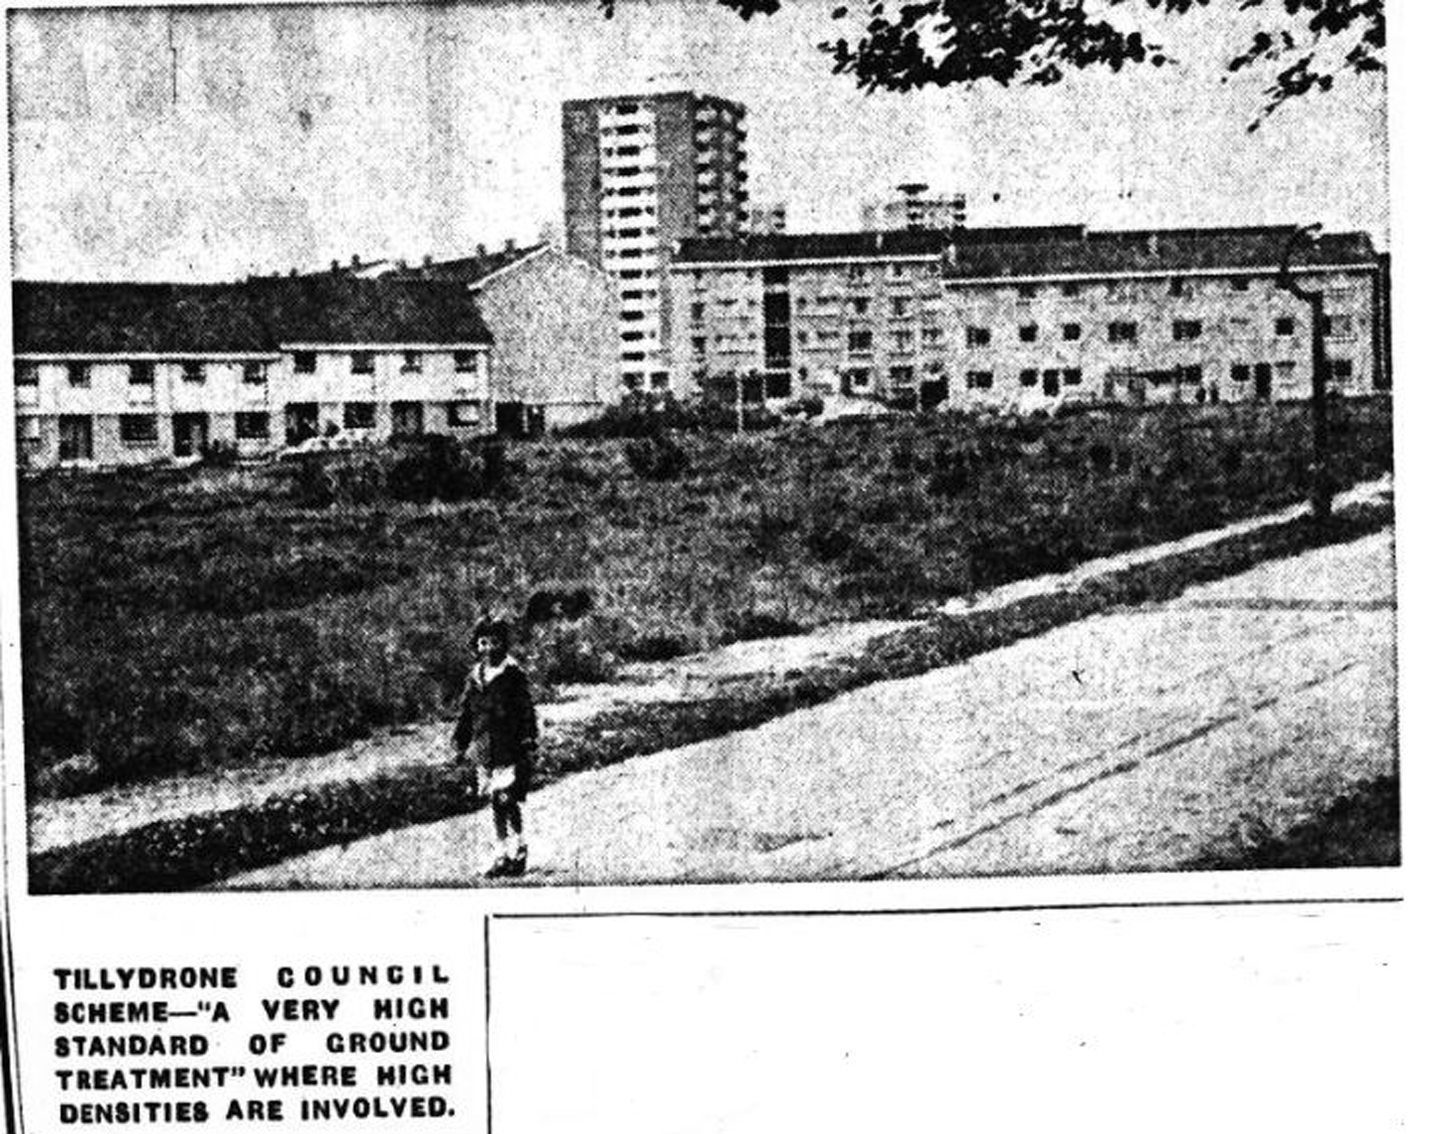 An image of Tillydrone estate in 1969 in the newspaper - the caption reads "Tillydrone council scheme - 'A very high standard of ground treatment' where high densities are involved